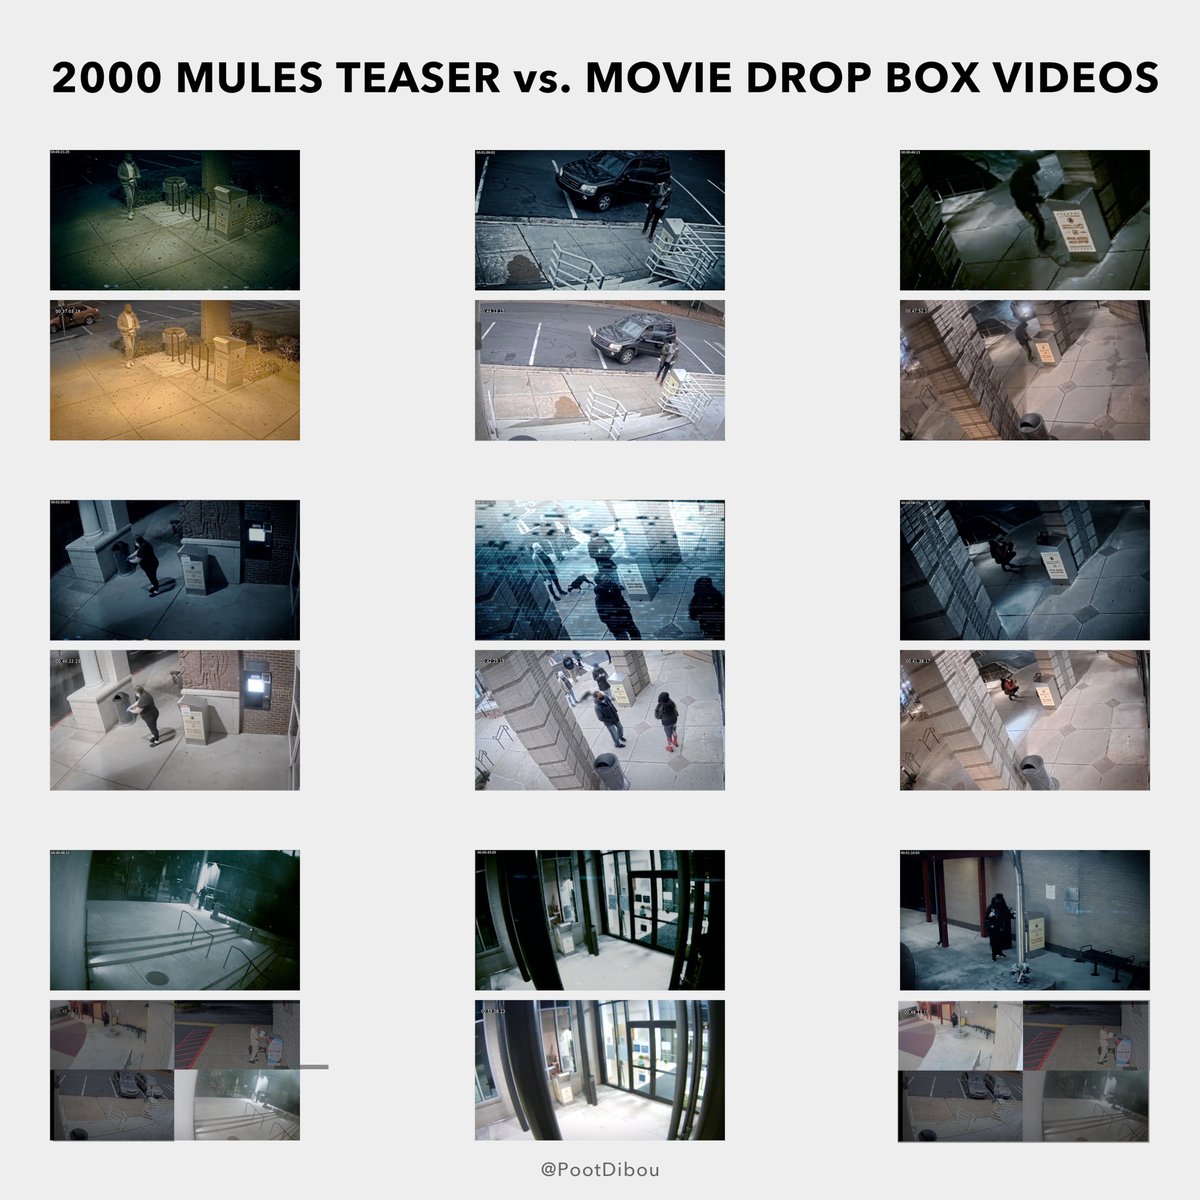 🧵Did you really see ballots dropped off in the middle of the night in 2000 Mules?

Nope.

- official drop box video was darkened in the teaser

- the teaser videos were all from the runoff in Fulton County, Georgia; it gets darker earlier in winter